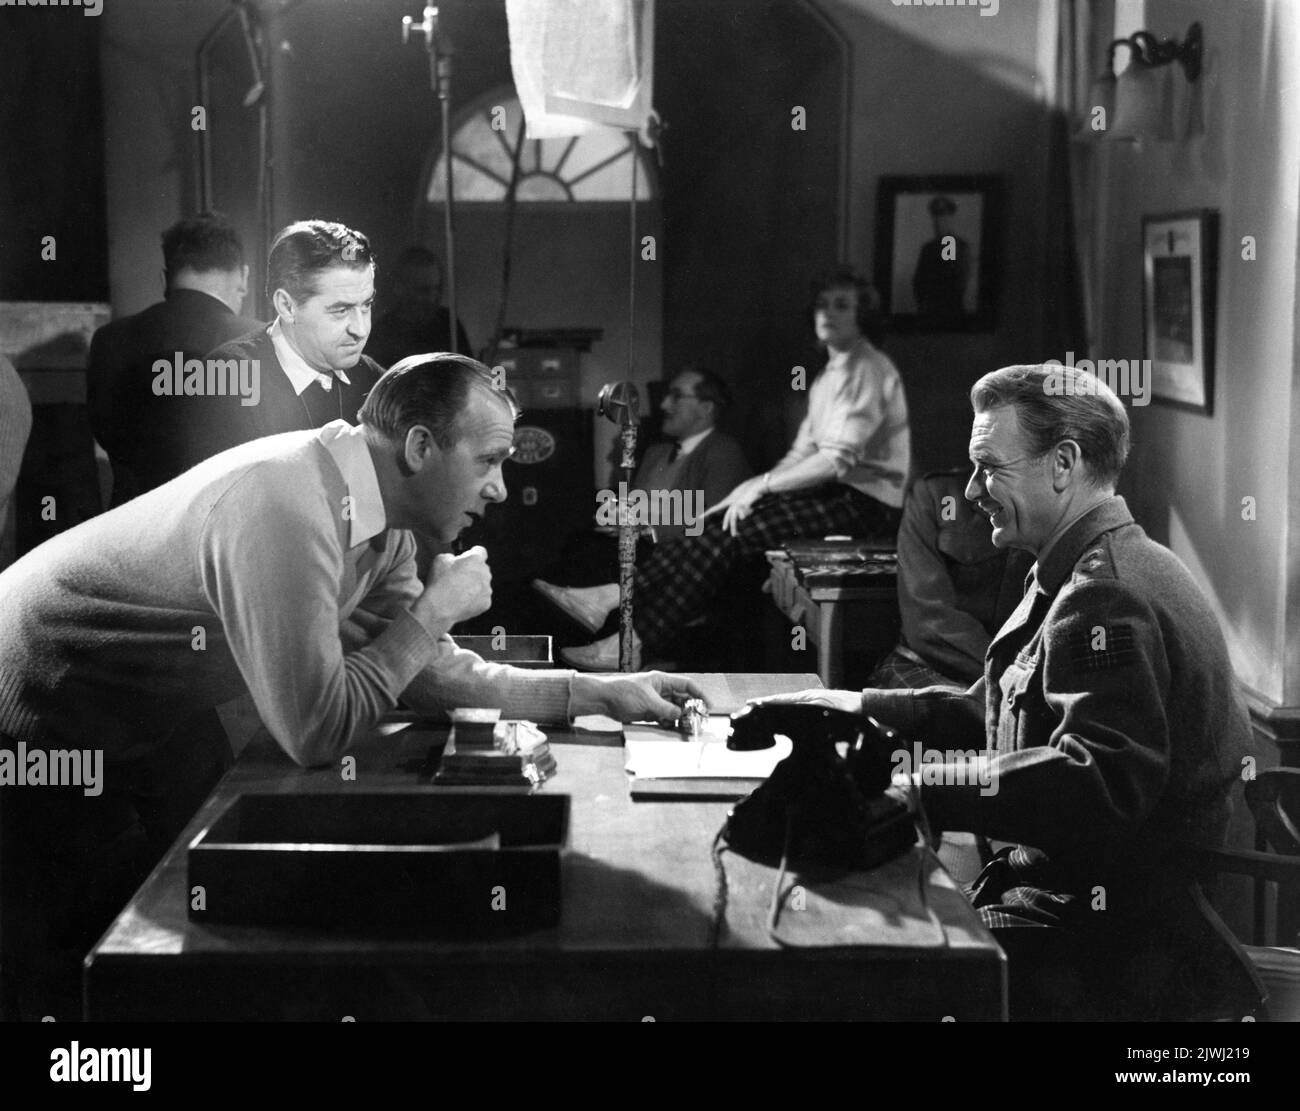 Cinematographer ARTHUR IBBETSON Director RONALD NEAME and JOHN MILLS on set candid with Movie Crew during filming of TUNES OF GLORY 1960 director RONALD NEAME novel / screenplay James Kennaway music Malcolm Arnold Knightsbridge Films / United Artists Stock Photo